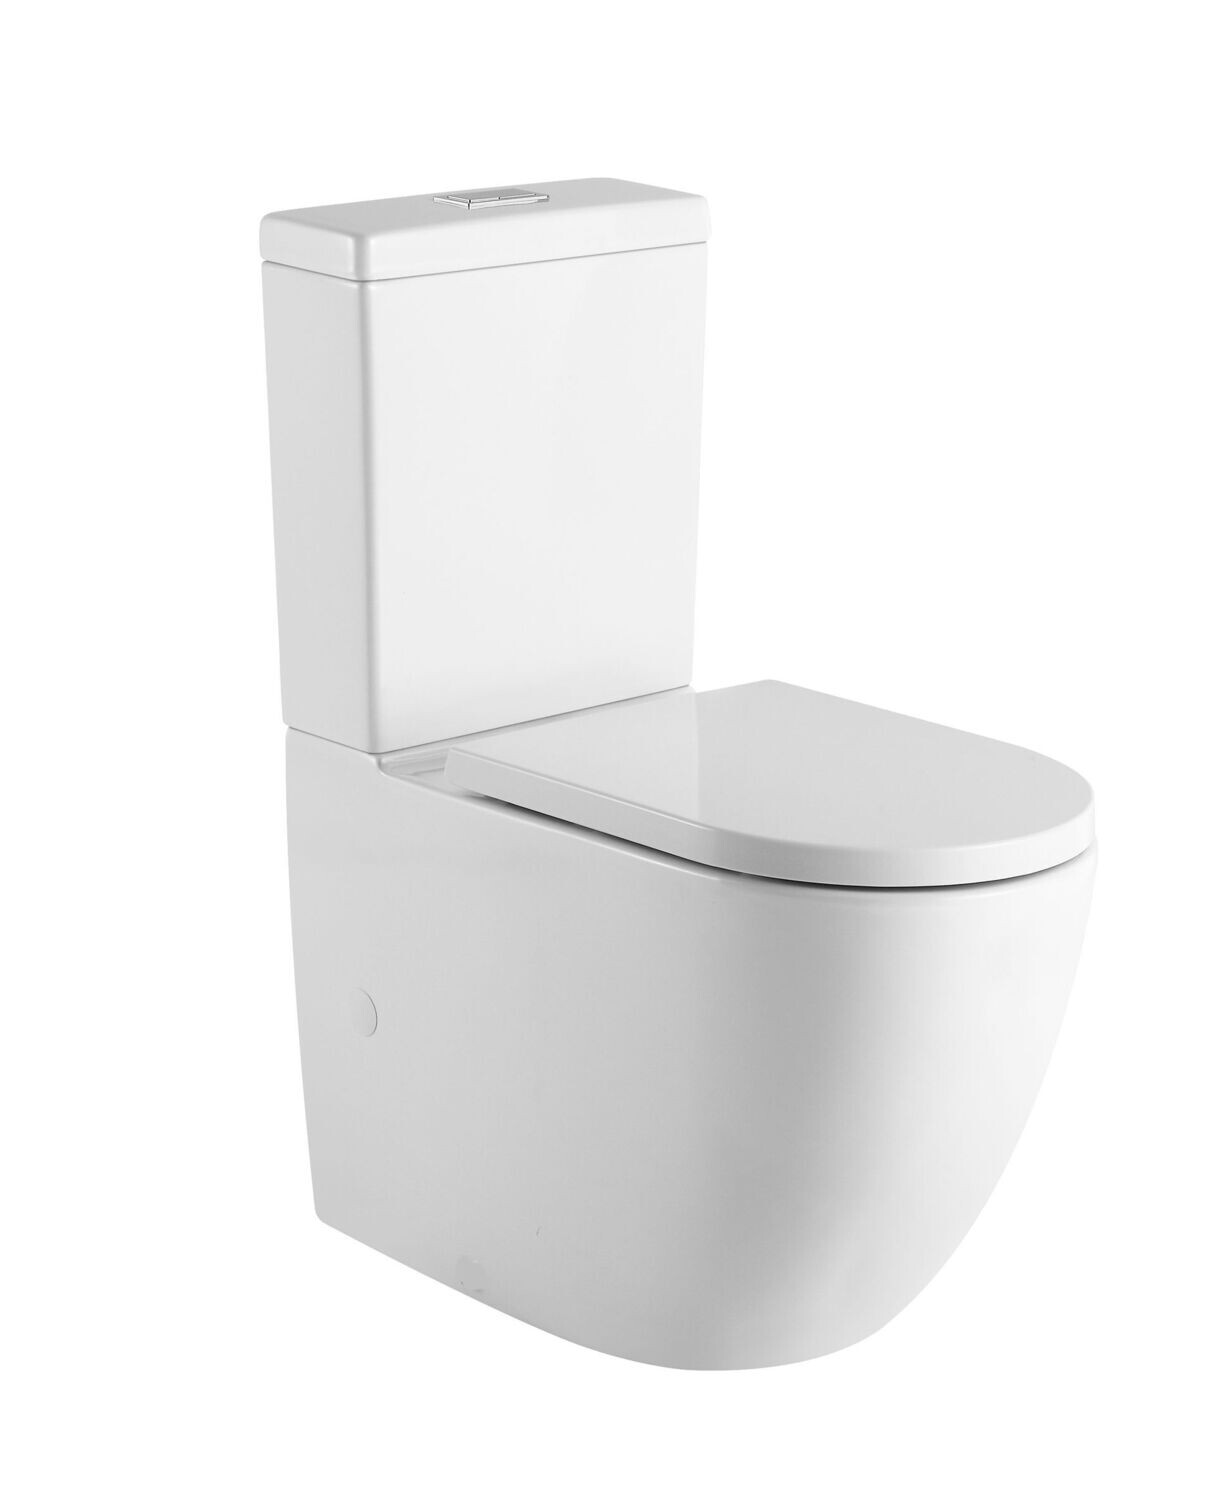 THE ULTIMATE TOILET Rimless & Tornado Flush-Extra Height-Easy cleaning Hygienius Glazing